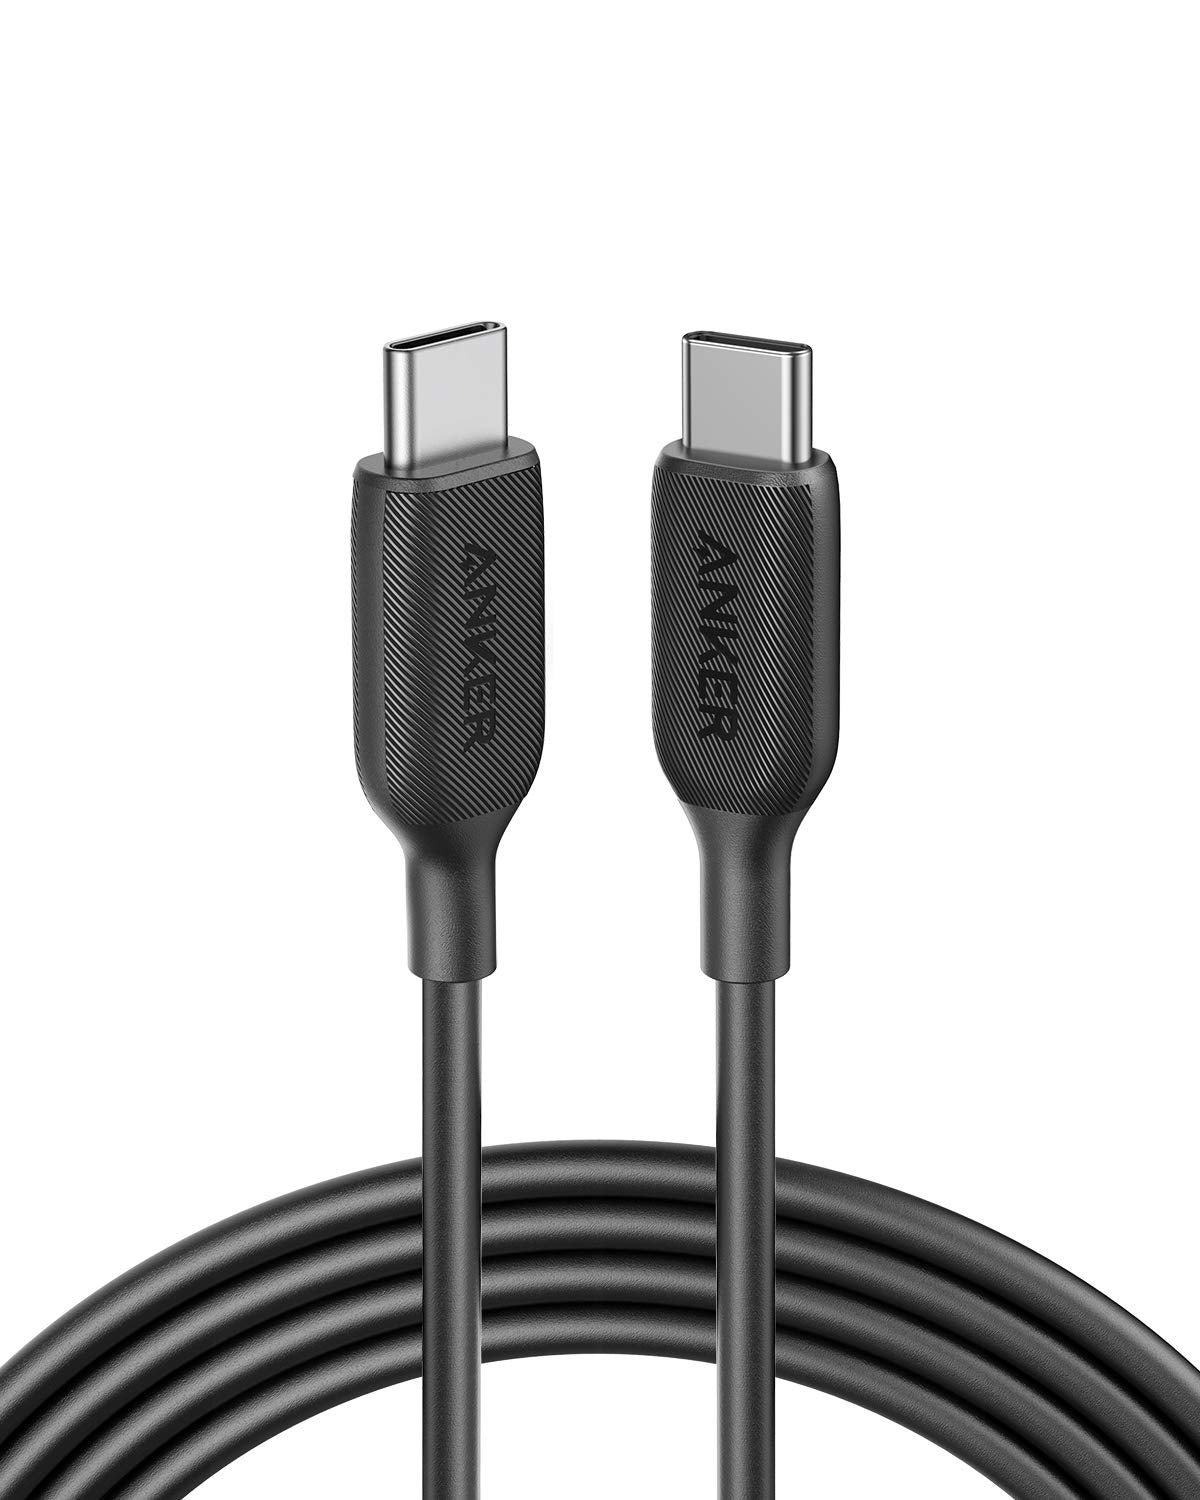 Anker Powerline III USB C Cable 60W USB-C to USB-C Cable 2.0 (1ft/ 3ft/ 6ft/ 10ft) Black/White